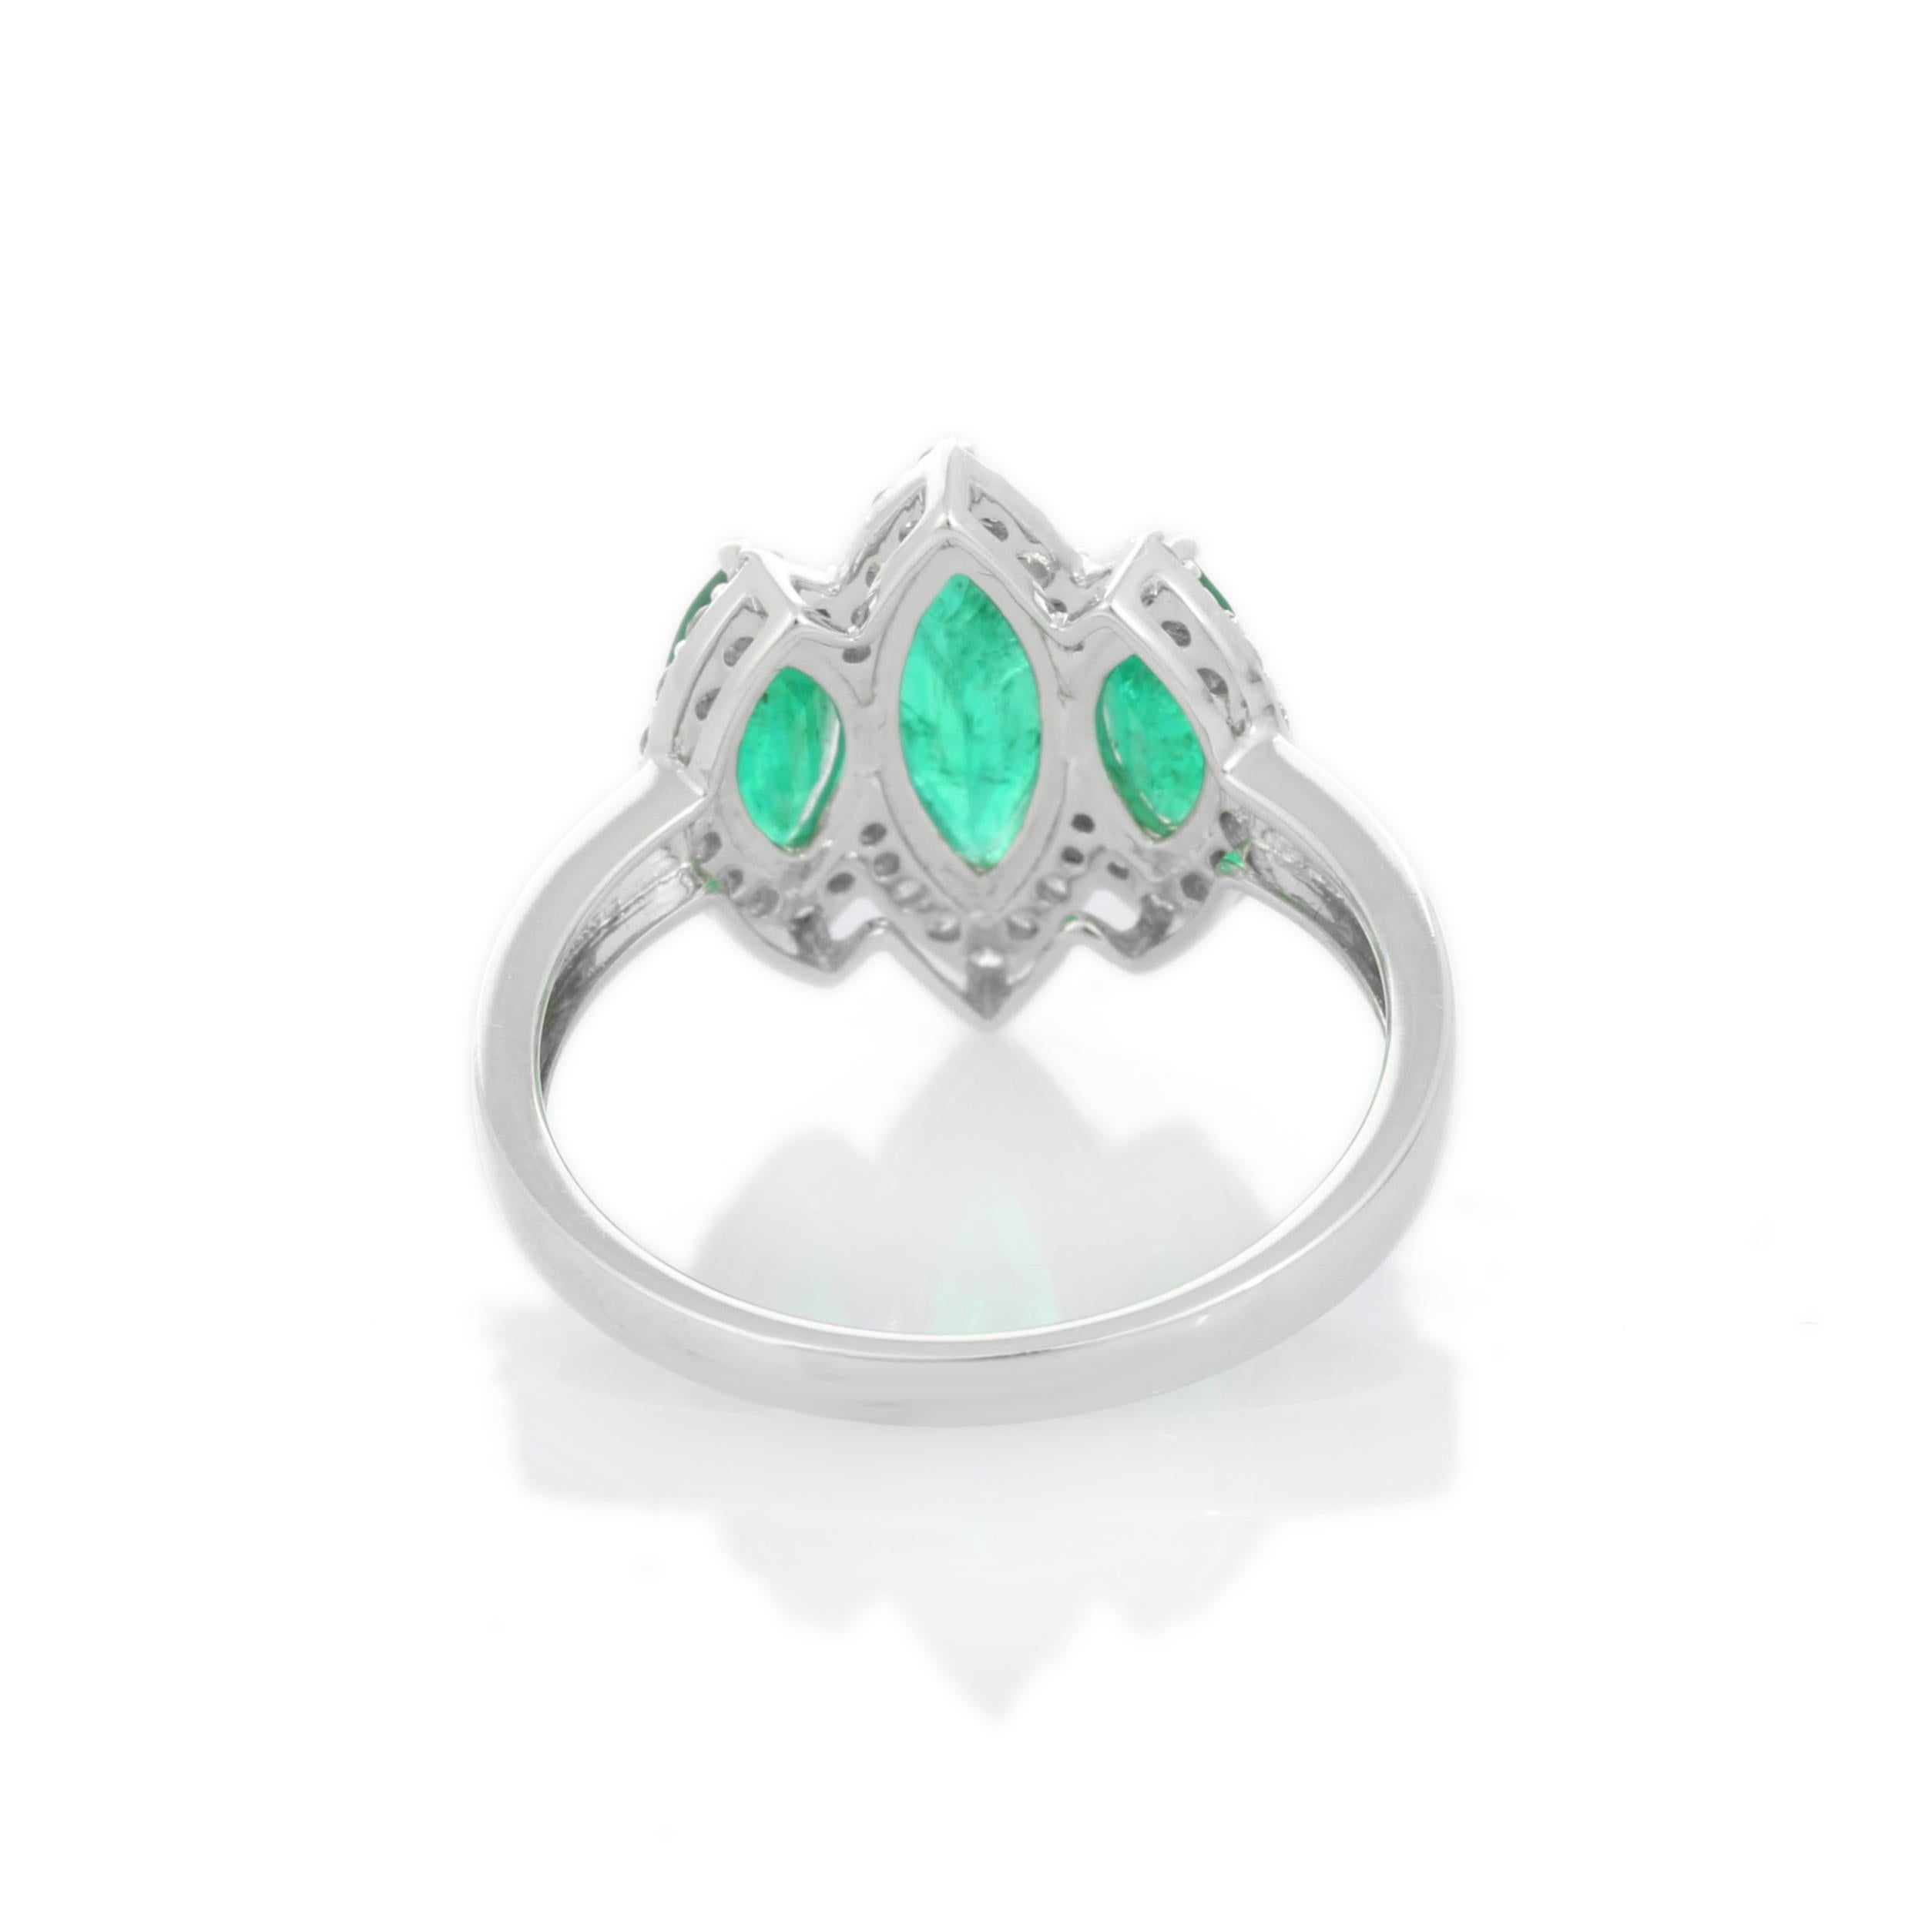 For Sale:  1.88 Carat Emerald Three Stone Ring with Diamonds in 18K White Gold 7